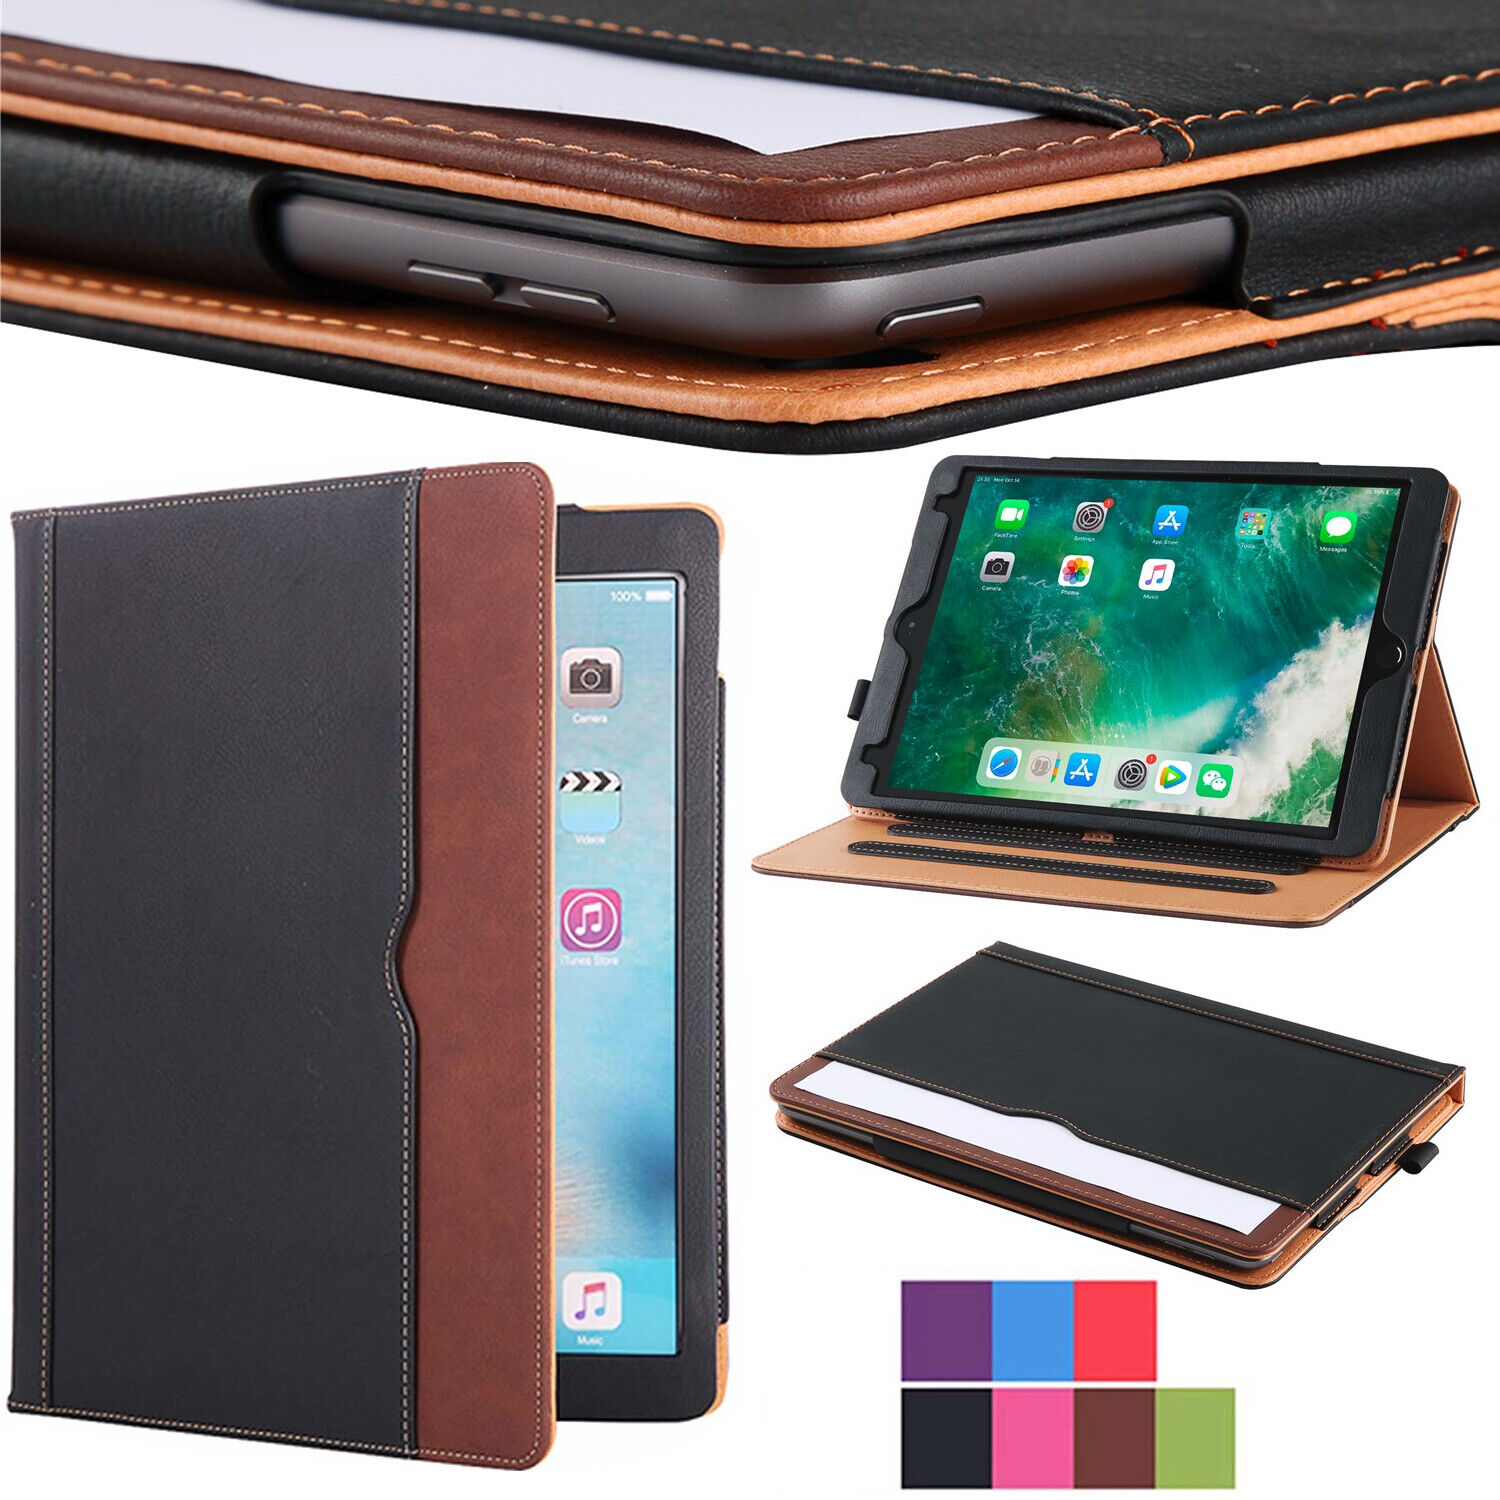 Soft Leather Smart Cover Sleep Wake Case For Apple iPad Air 4th Generation 10.9